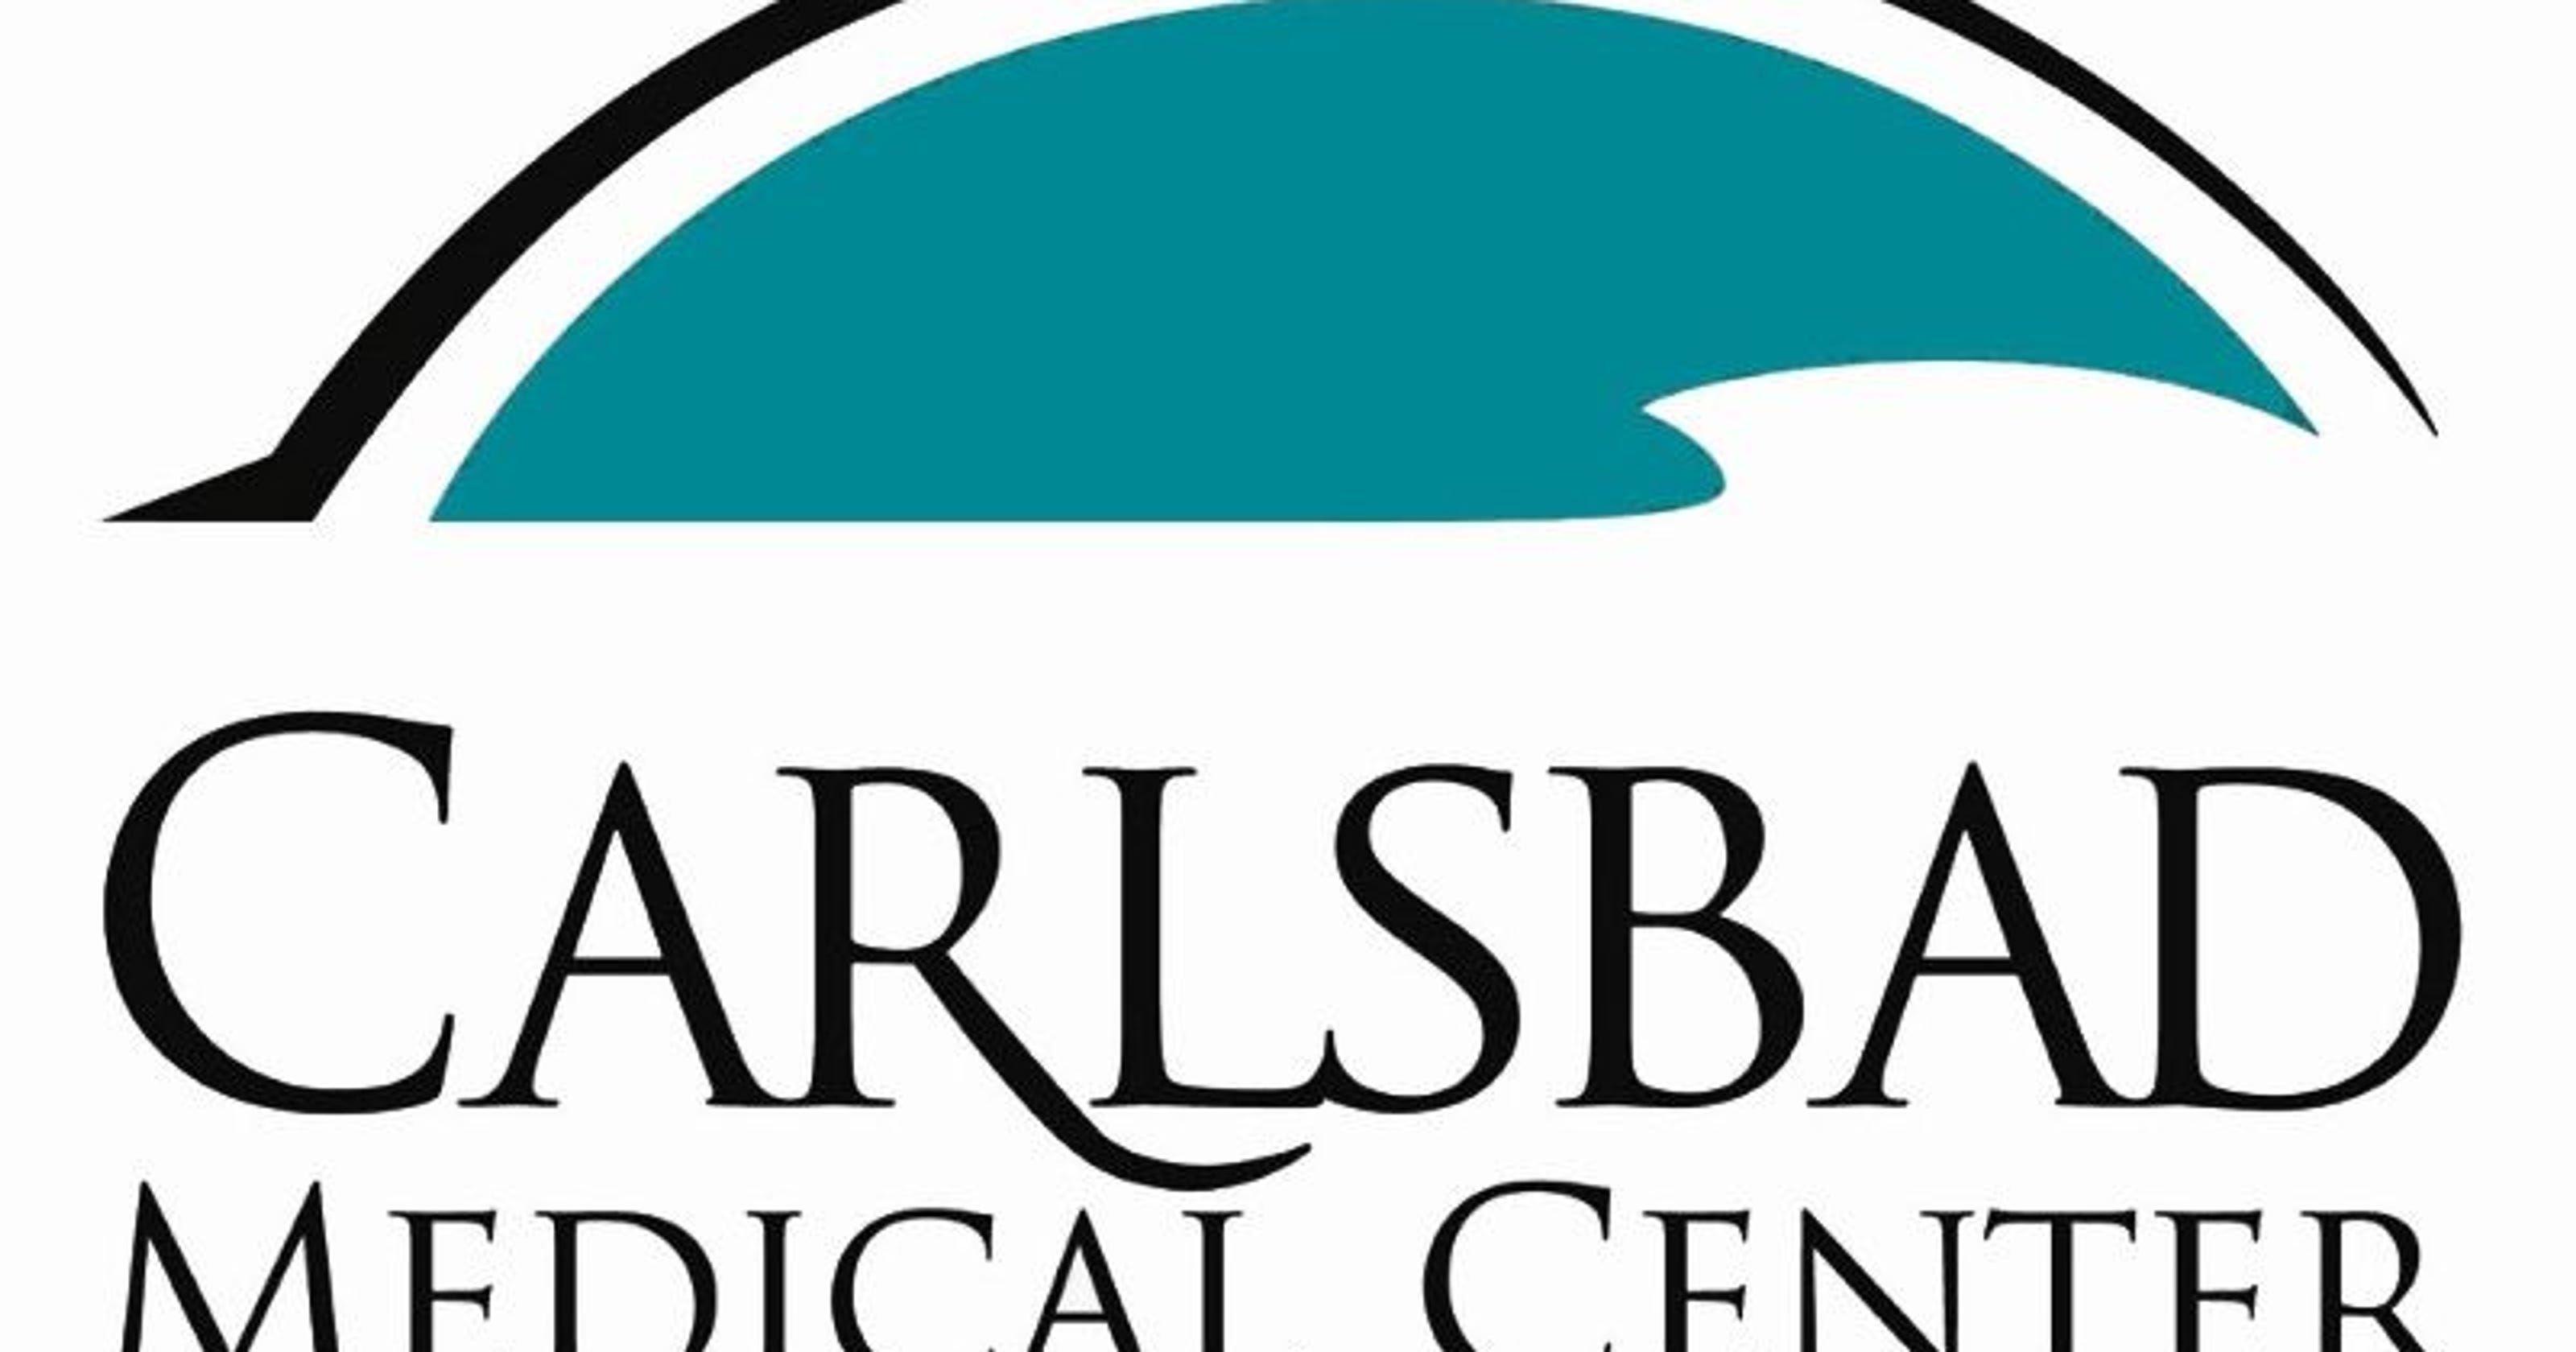 Carlsbad Logo - Eddy County declares itself a Sanctuary for the Unborn